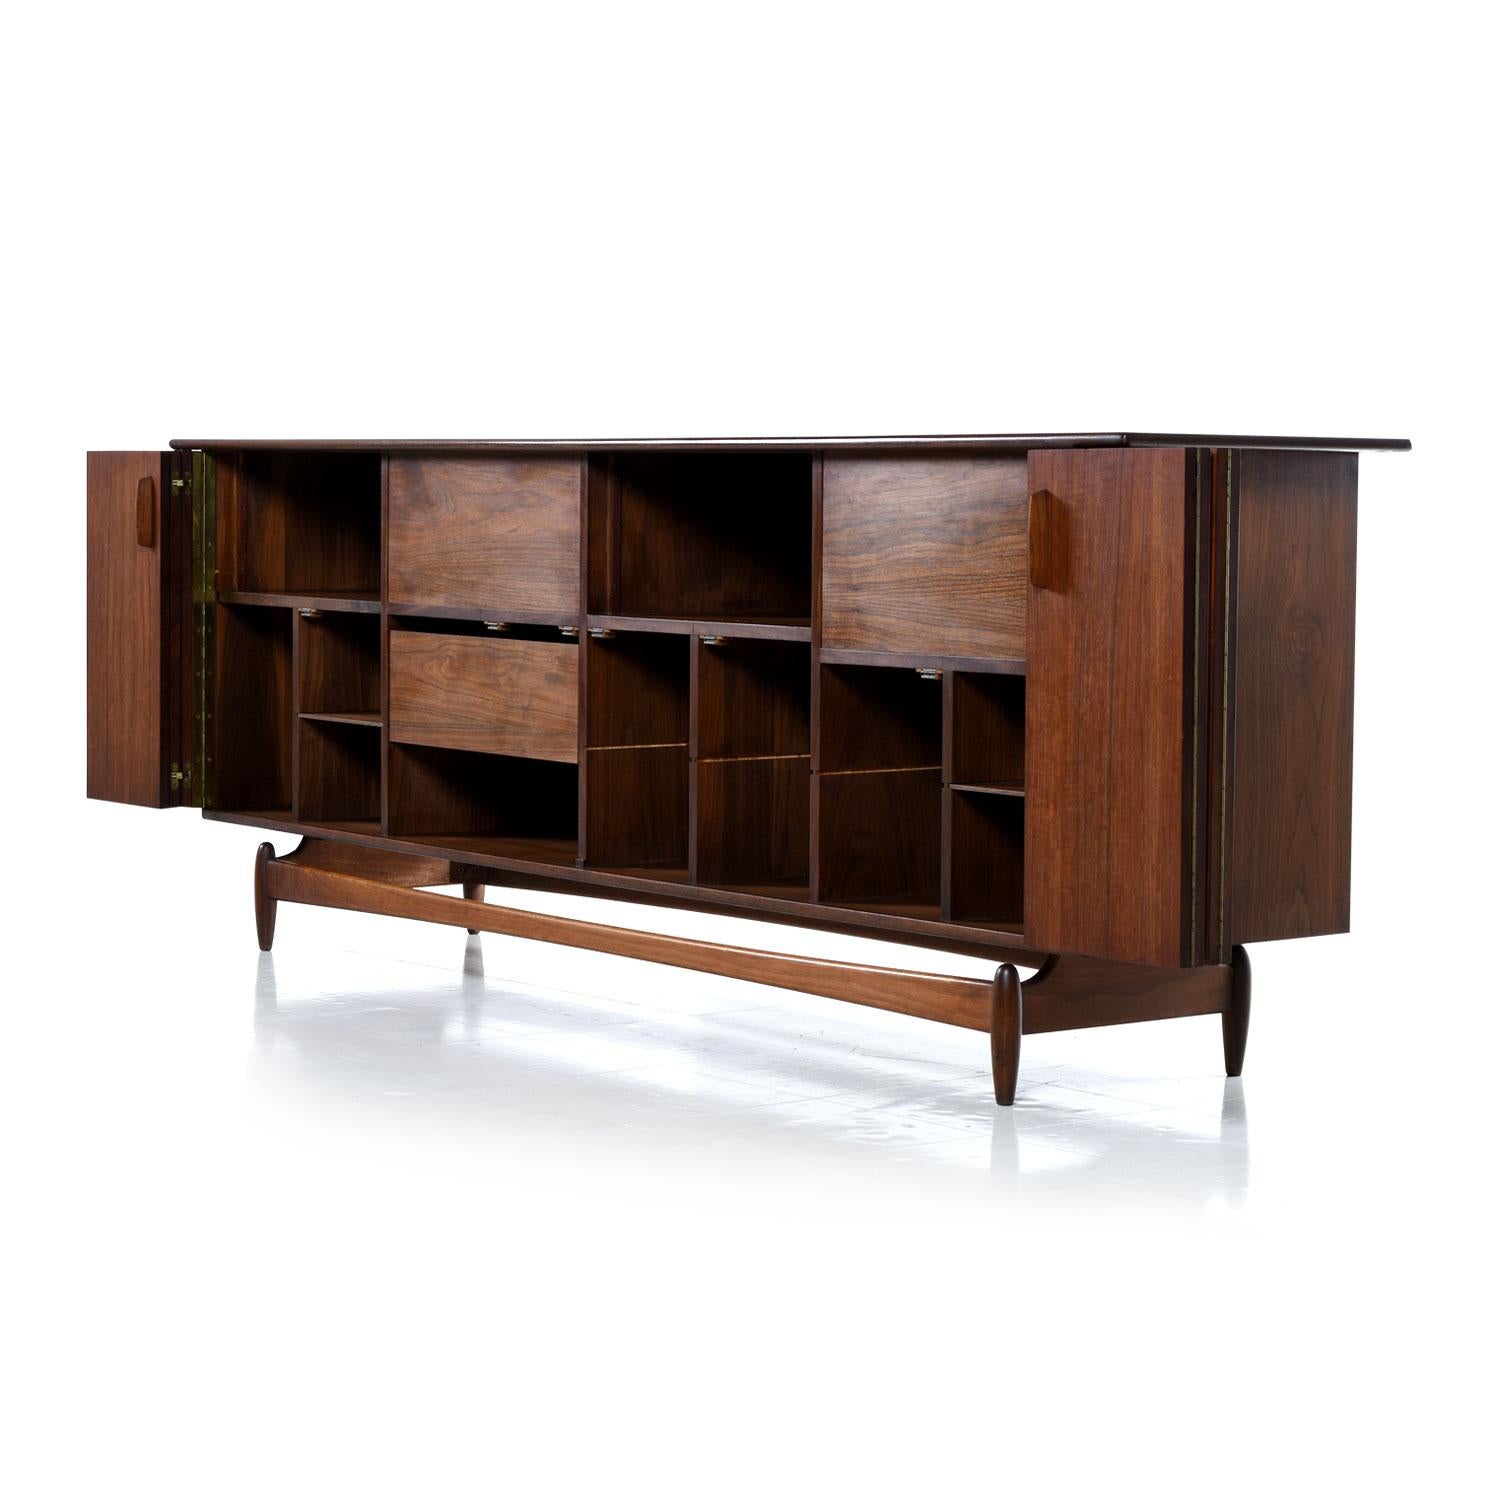 Oh boy, where do we start on this one? Well, if you want to own the coolest piece of audio cabinetry ever created, this is it. Although it looks similar to the works to Jens Risom and Arne Vodder, our best bet is that this is a custom made 1 of 1.